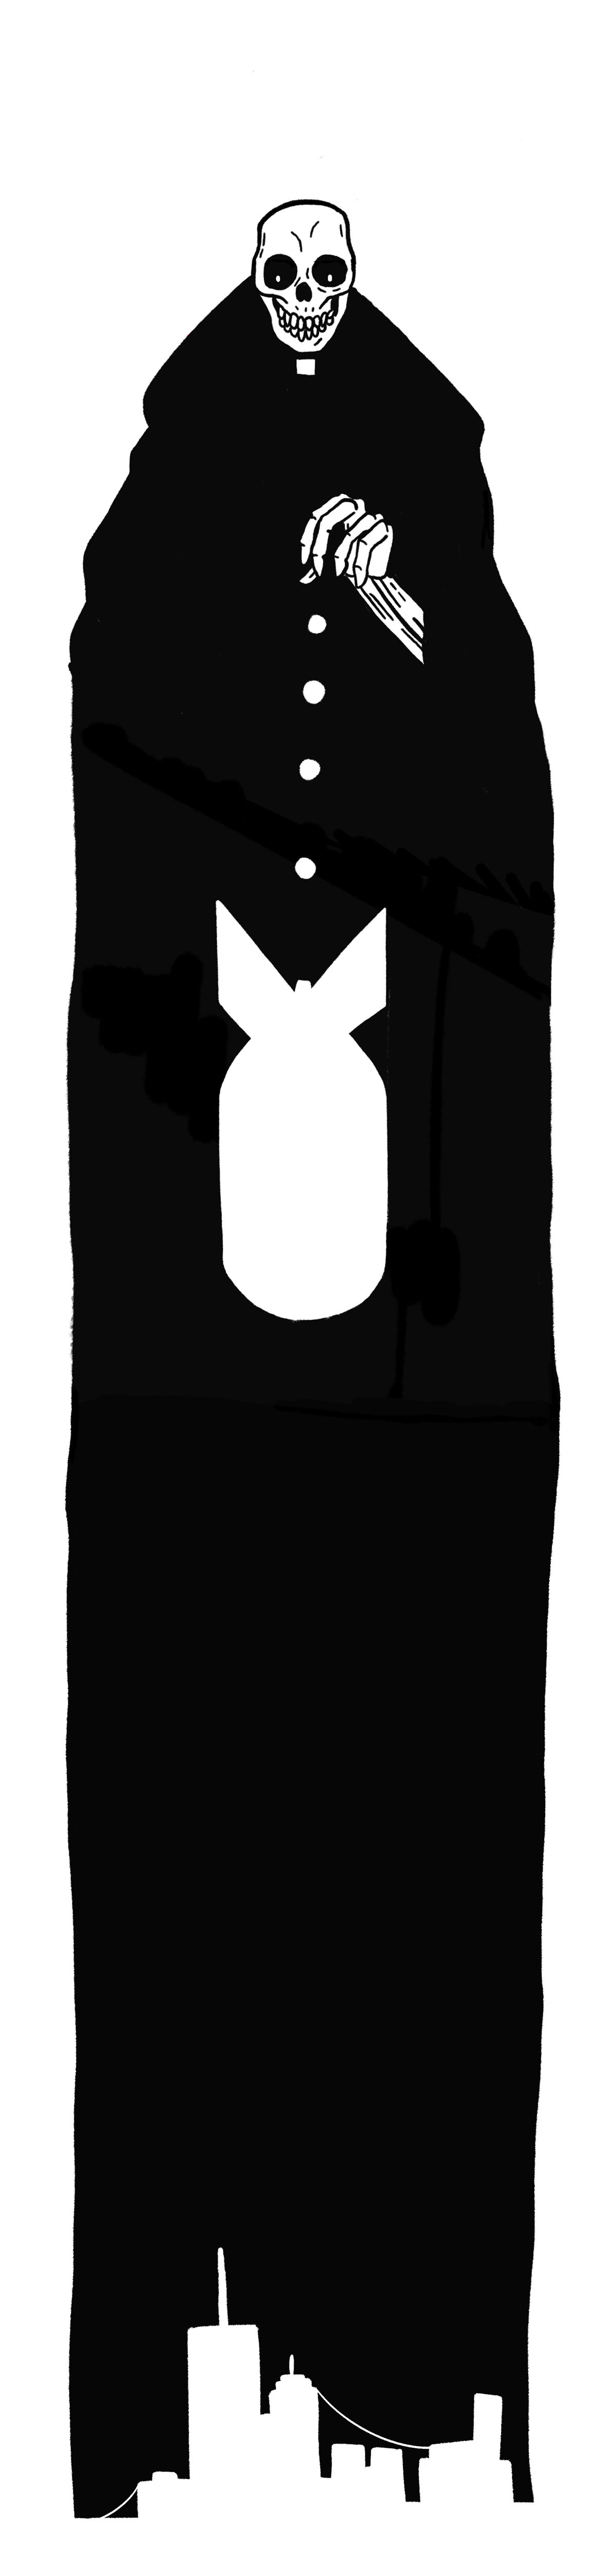 Graphic black and white skeleton figure with buildings